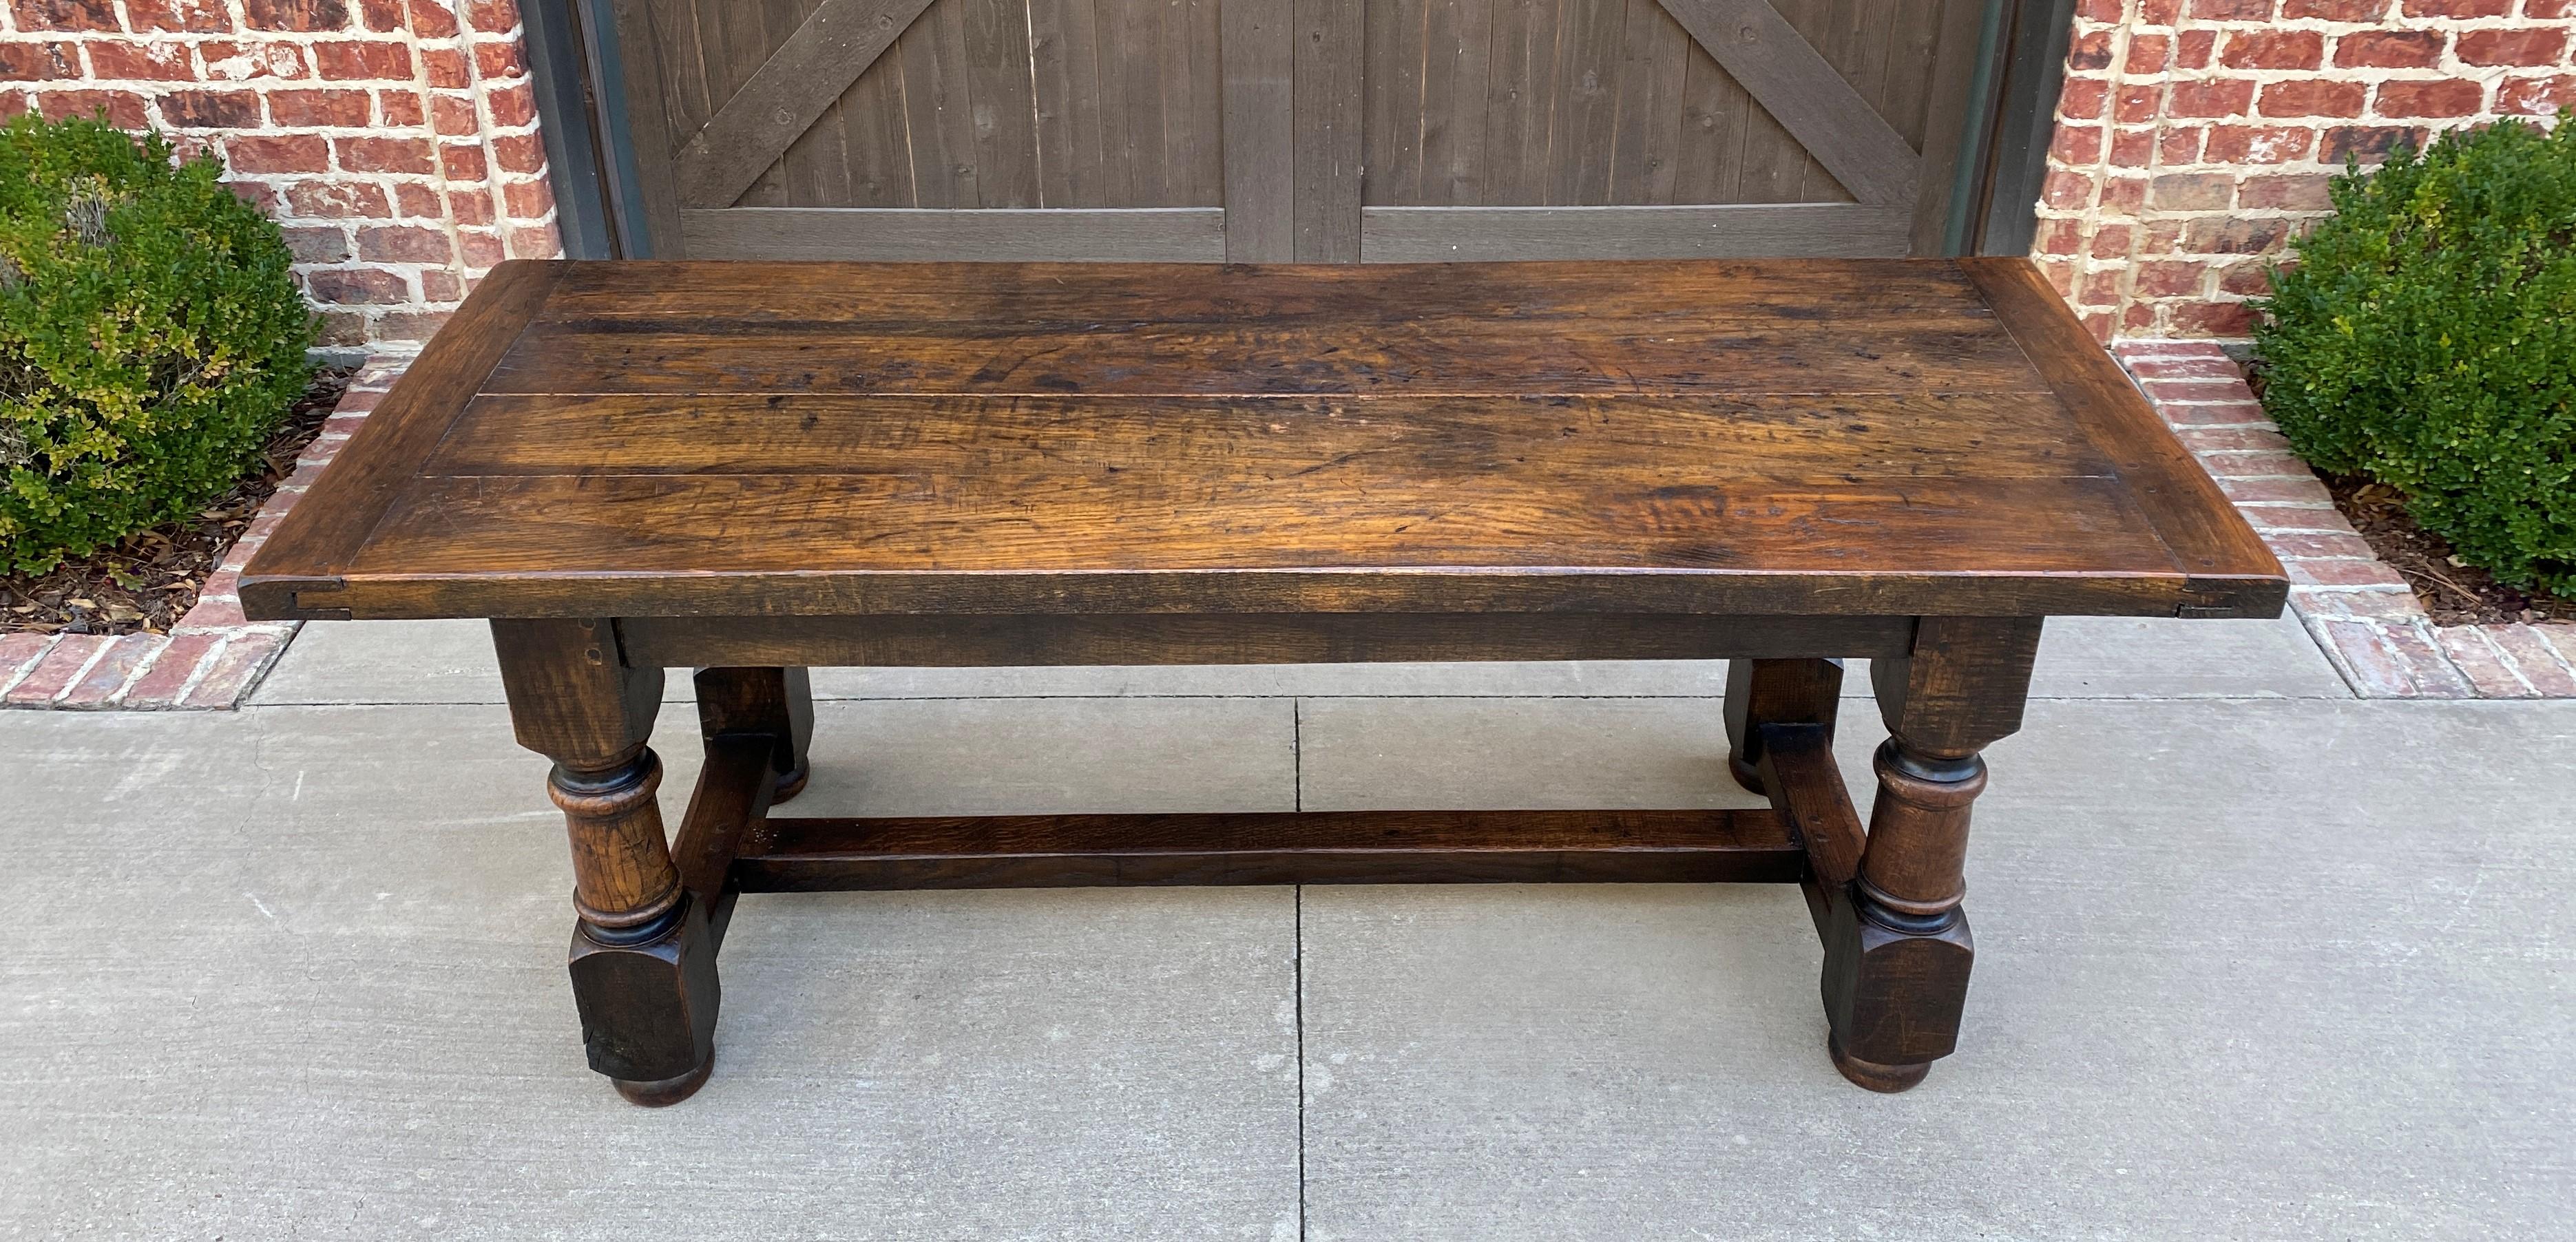 Outstanding antique French country oak farm farmhouse dining table conference library table or desk~~pegged construction~~c. Late 19th century

This table has 